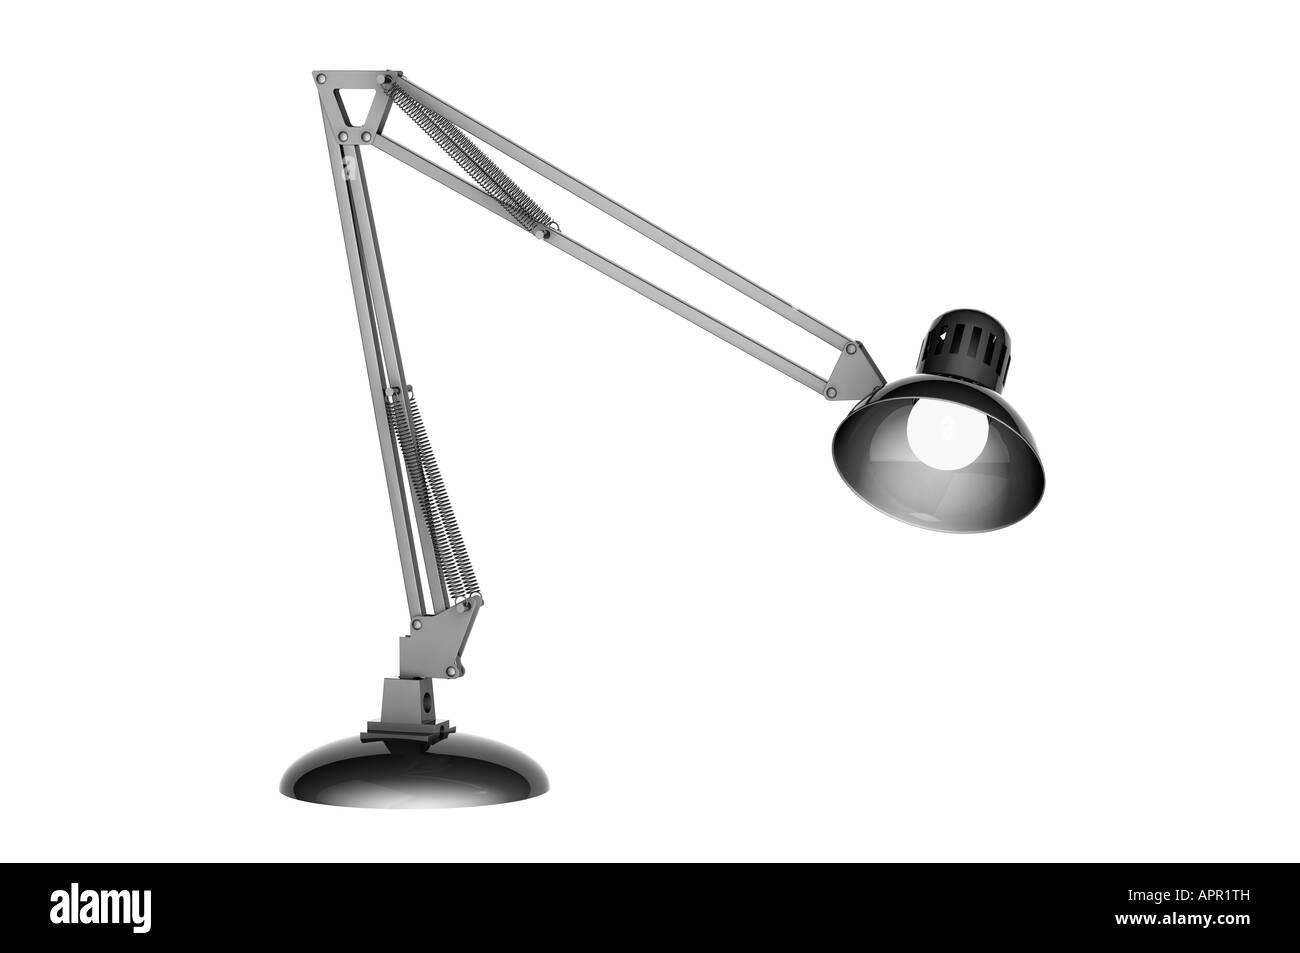 Anglepoise table lamp Stock Photo